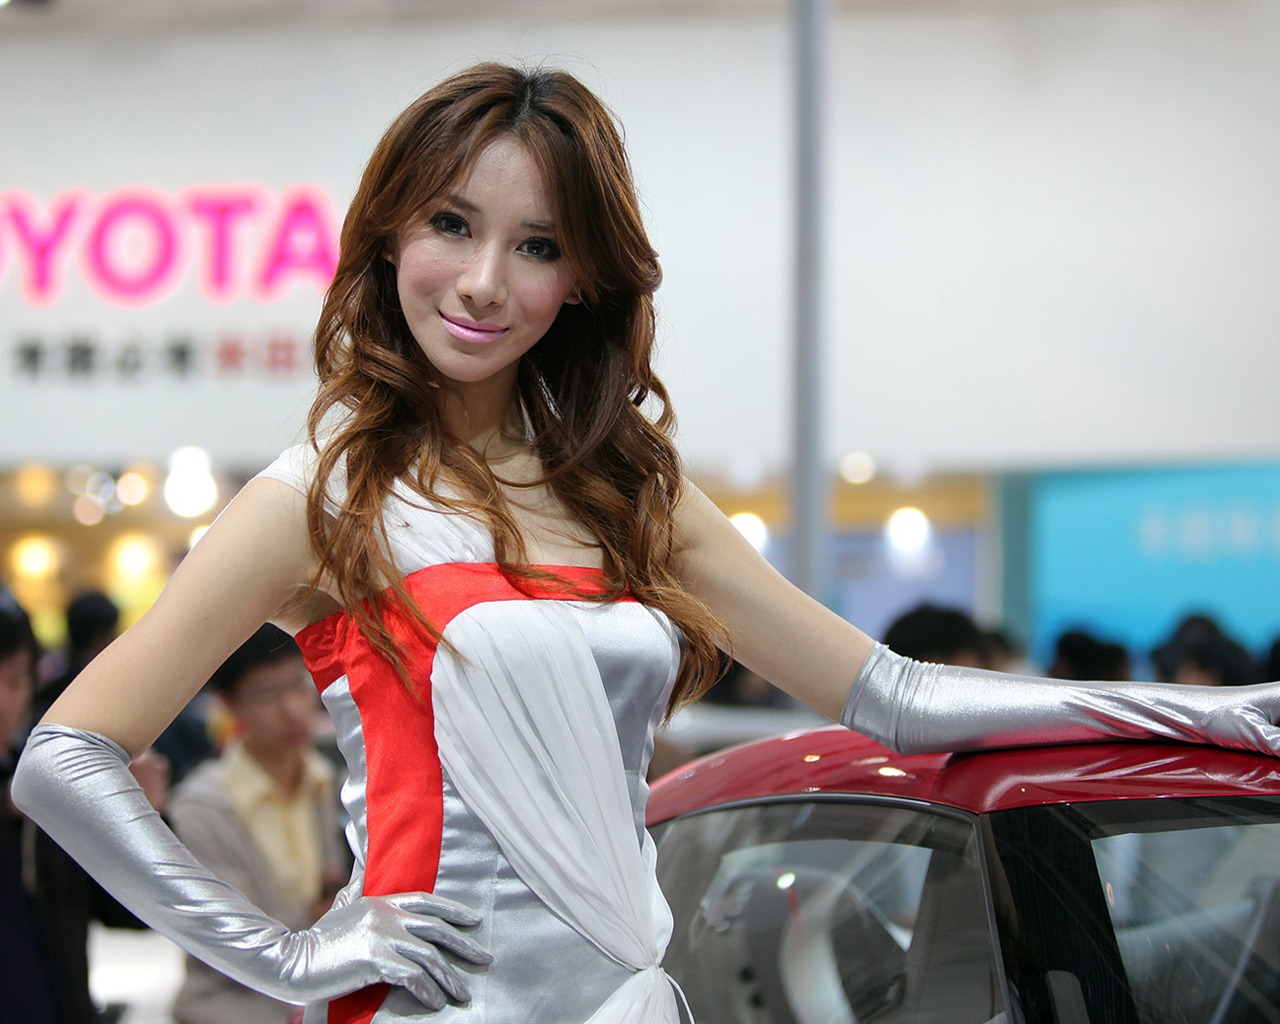 2010 Beijing Auto Show car models Collection (2) #4 - 1280x1024